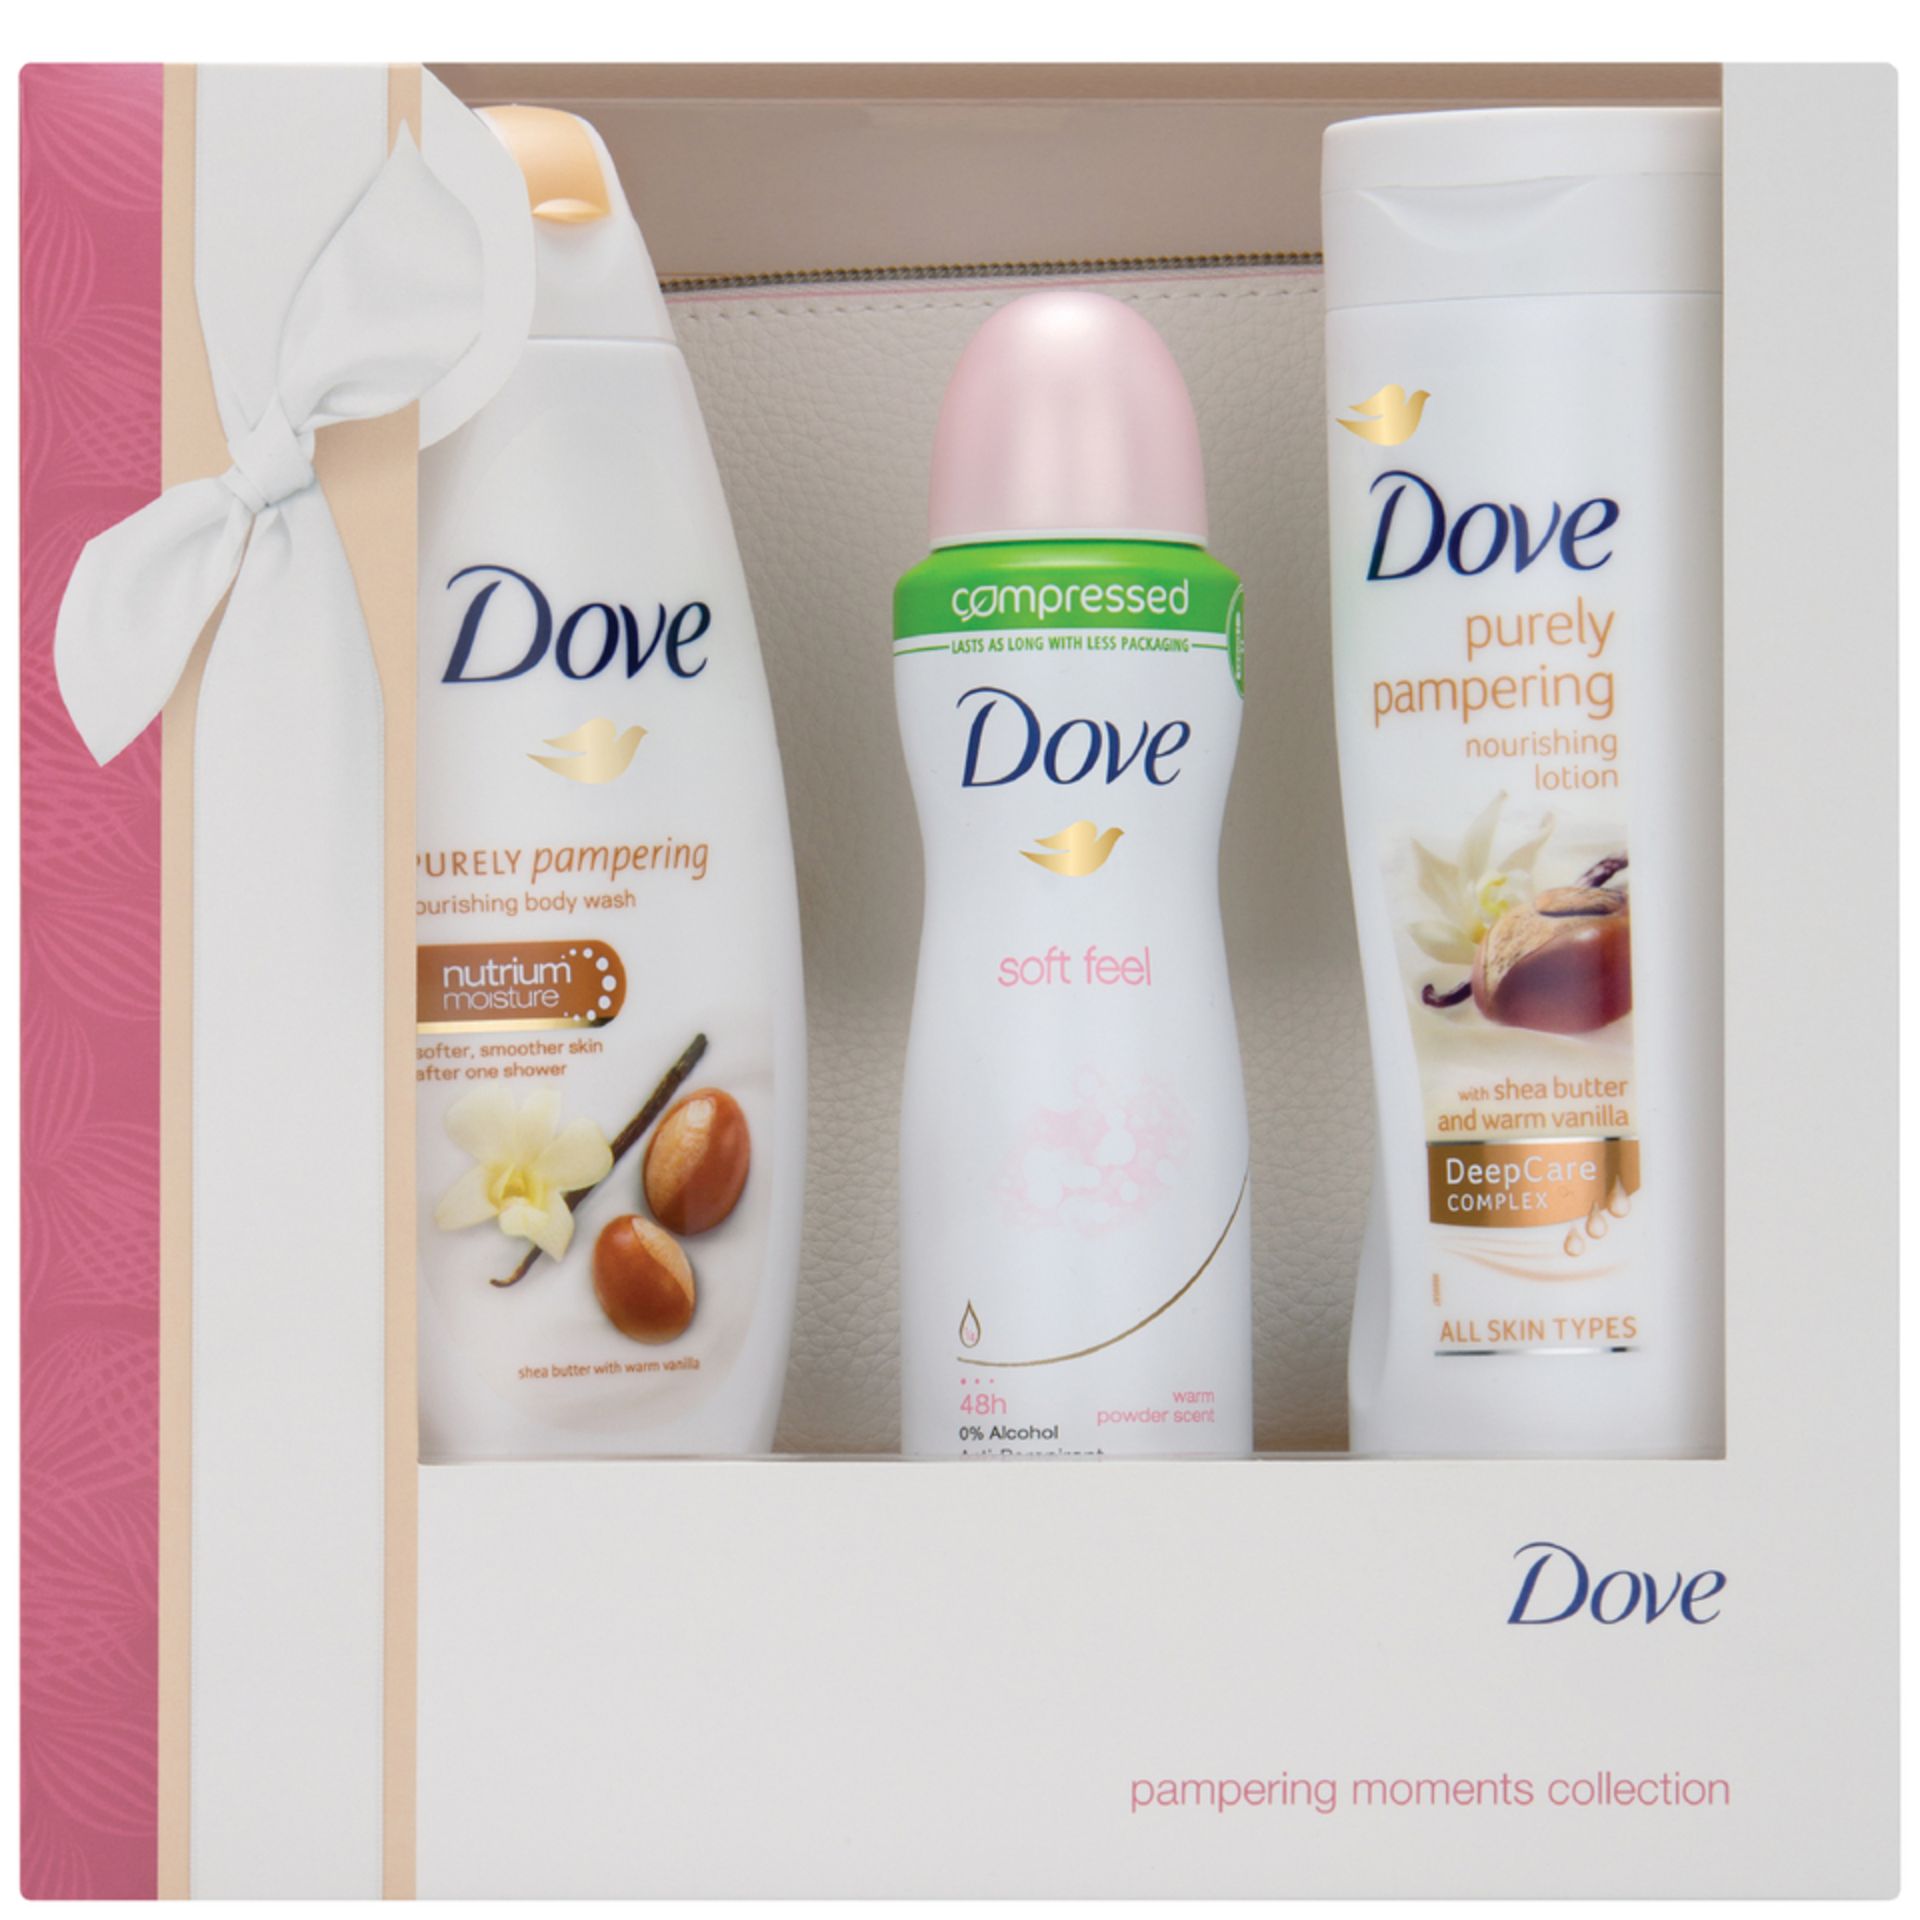 V *TRADE QTY* Brand New Dove Pampering Moments Trio & Washbag Set Includes 3 Full-Size Dove Products